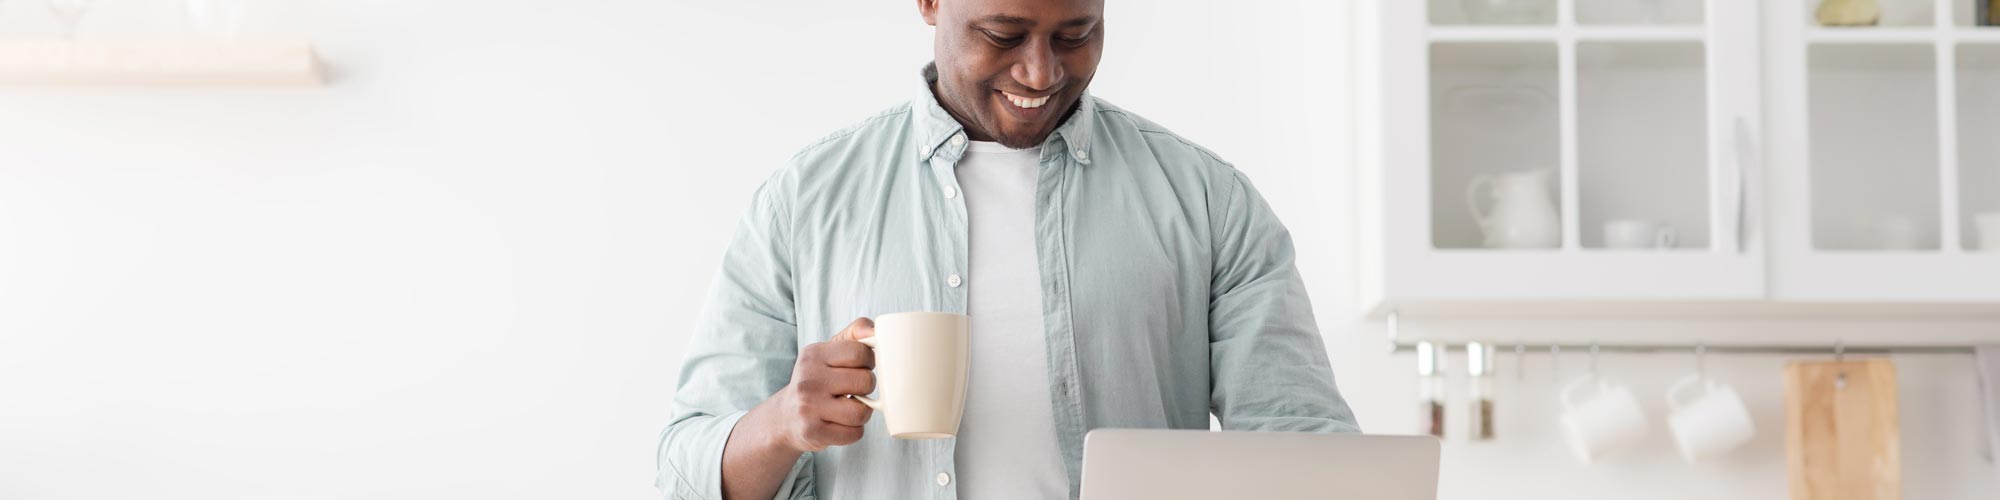 Man looking at laptop holding a mug in his hand.